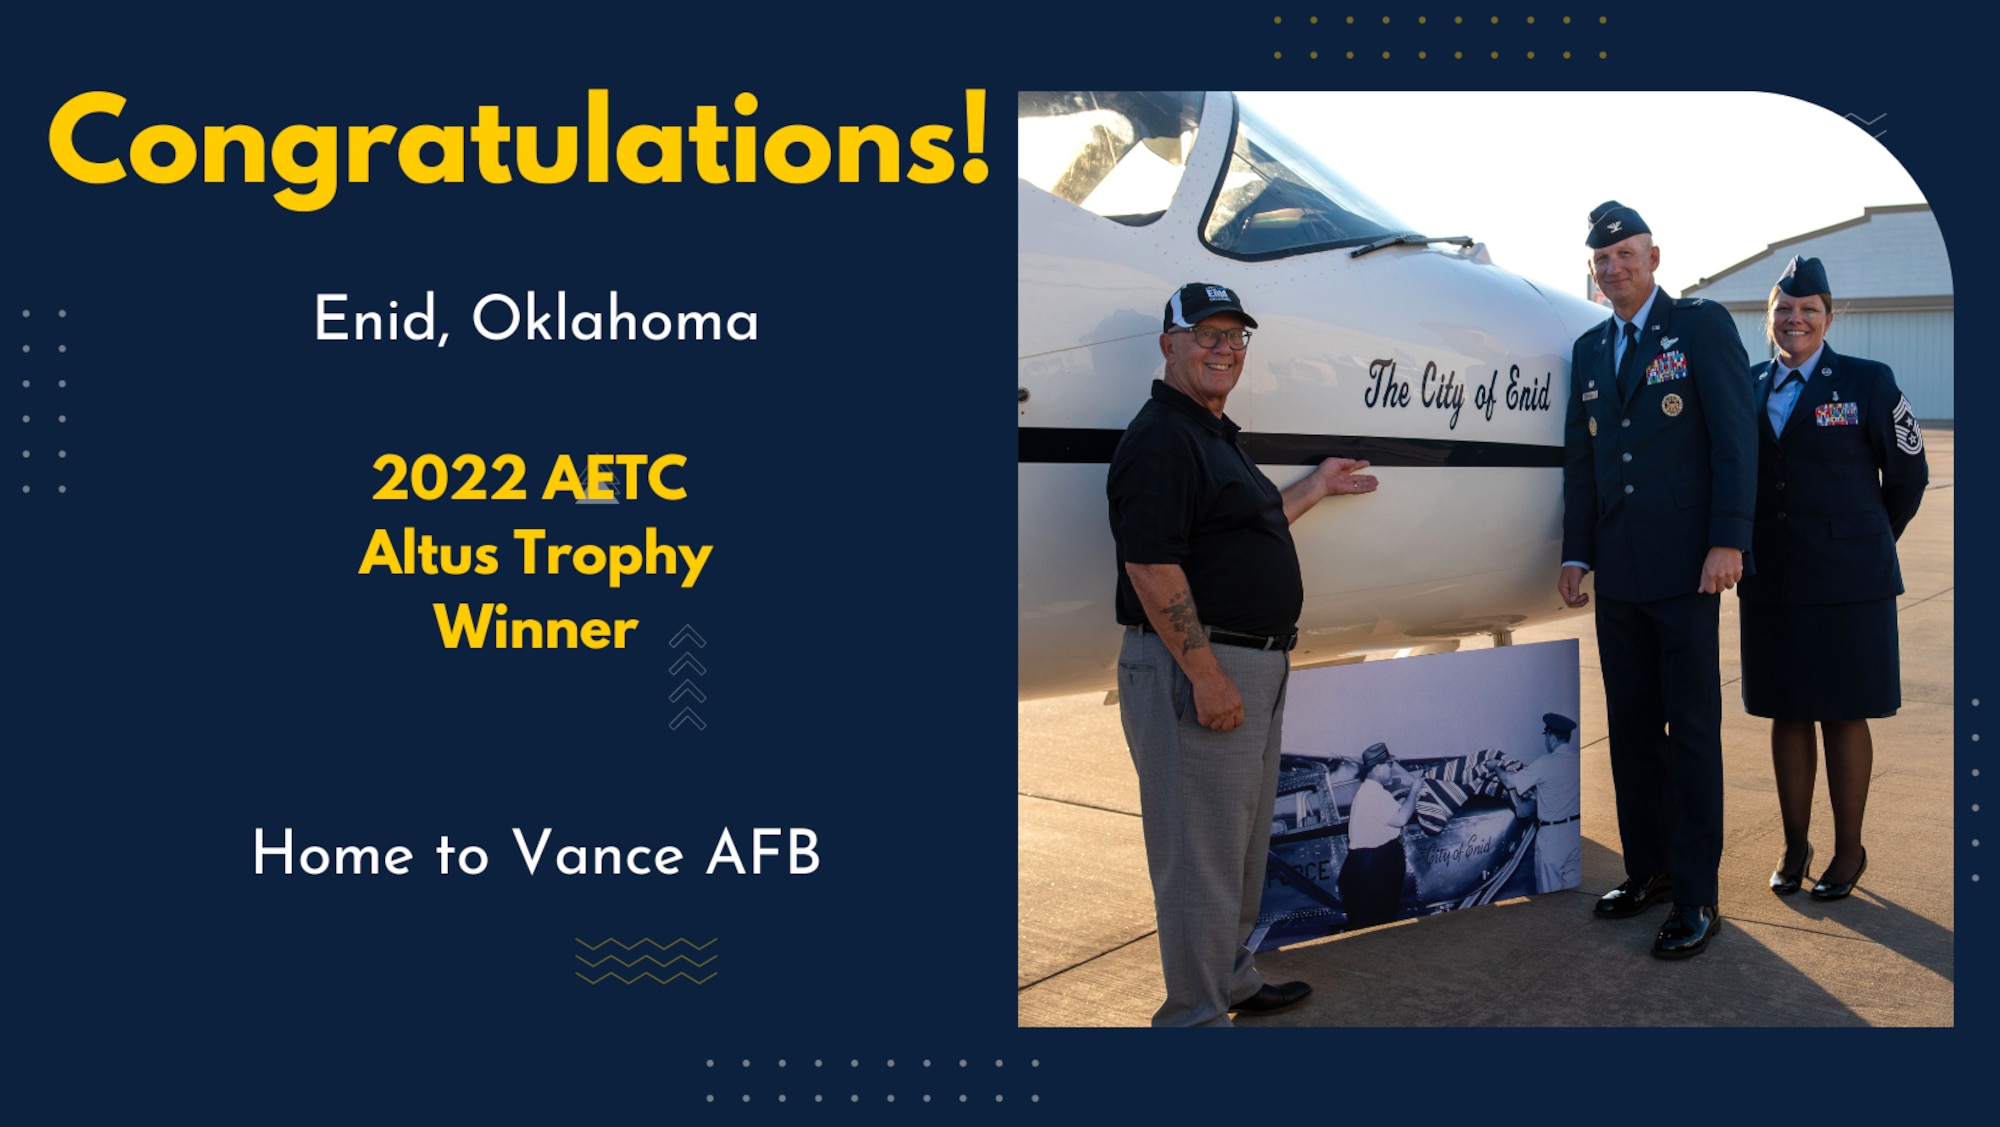 Graphic congratulating Enid, Oklahoma home to Vance Air Force Base on being named the 2022 Air Education and Training Command Altus Trophy Winner